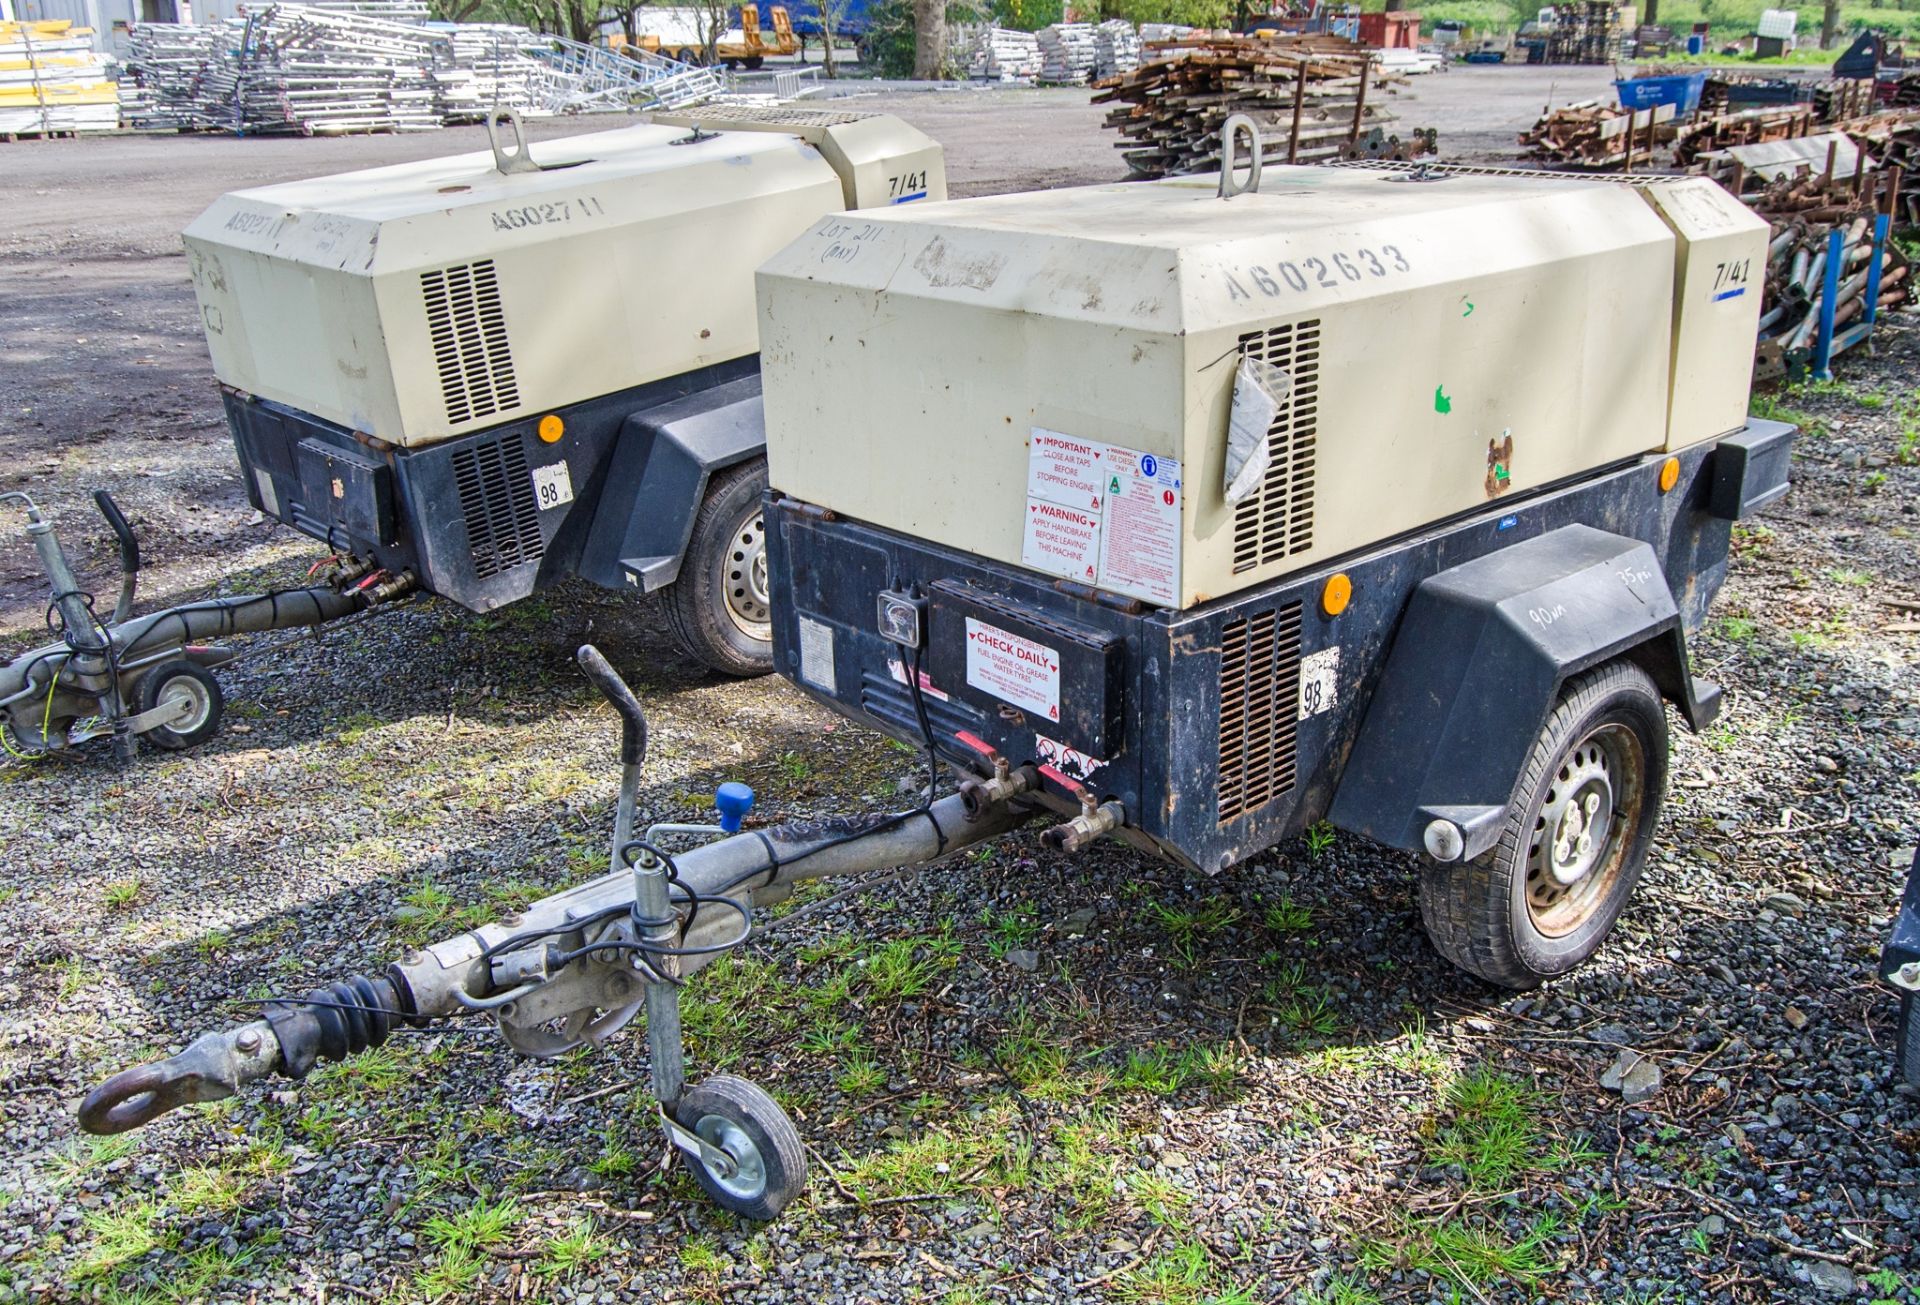 Doosan 741 diesel driven fast tow mobile air compressor Year: 2013 S/N: 432010 Recorded Hours: